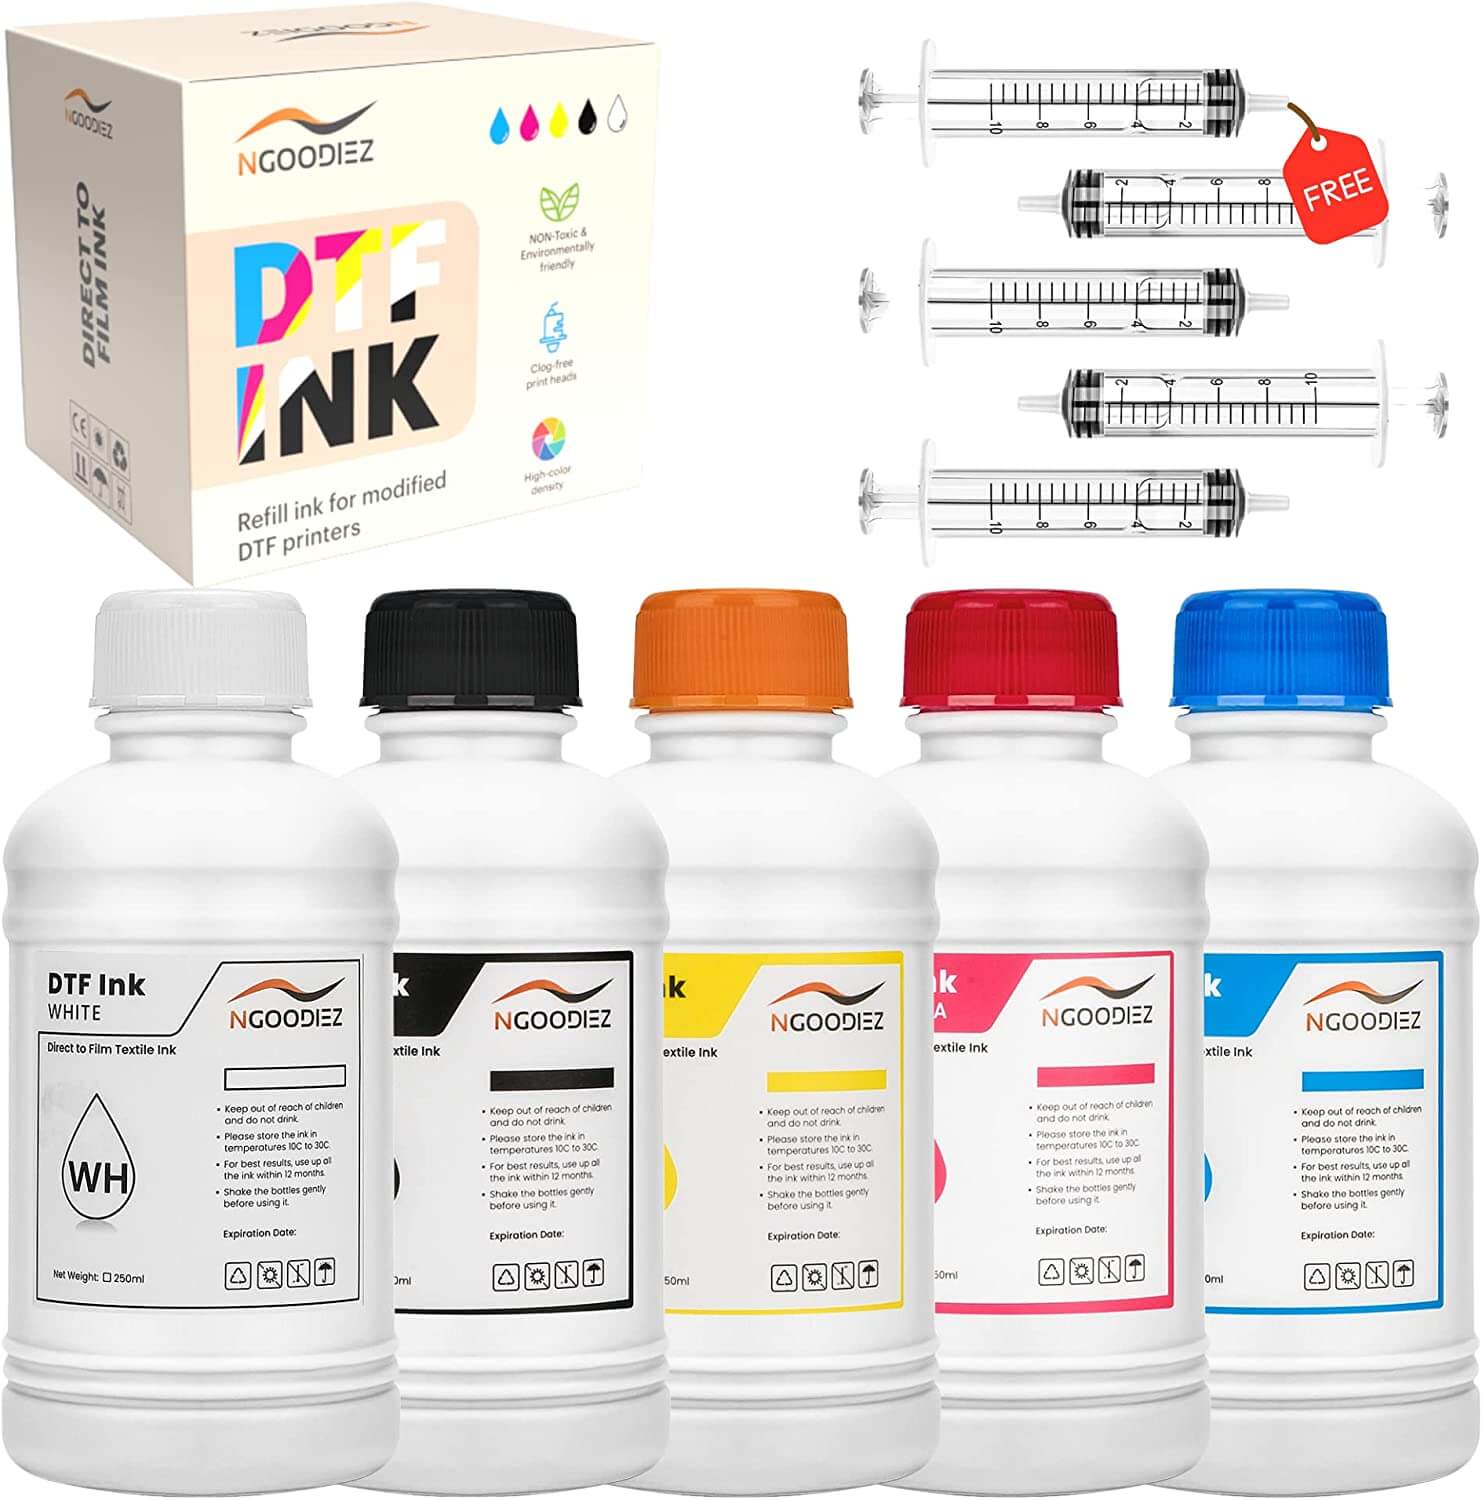 DTF Ink (250ml) NGOODIEZ